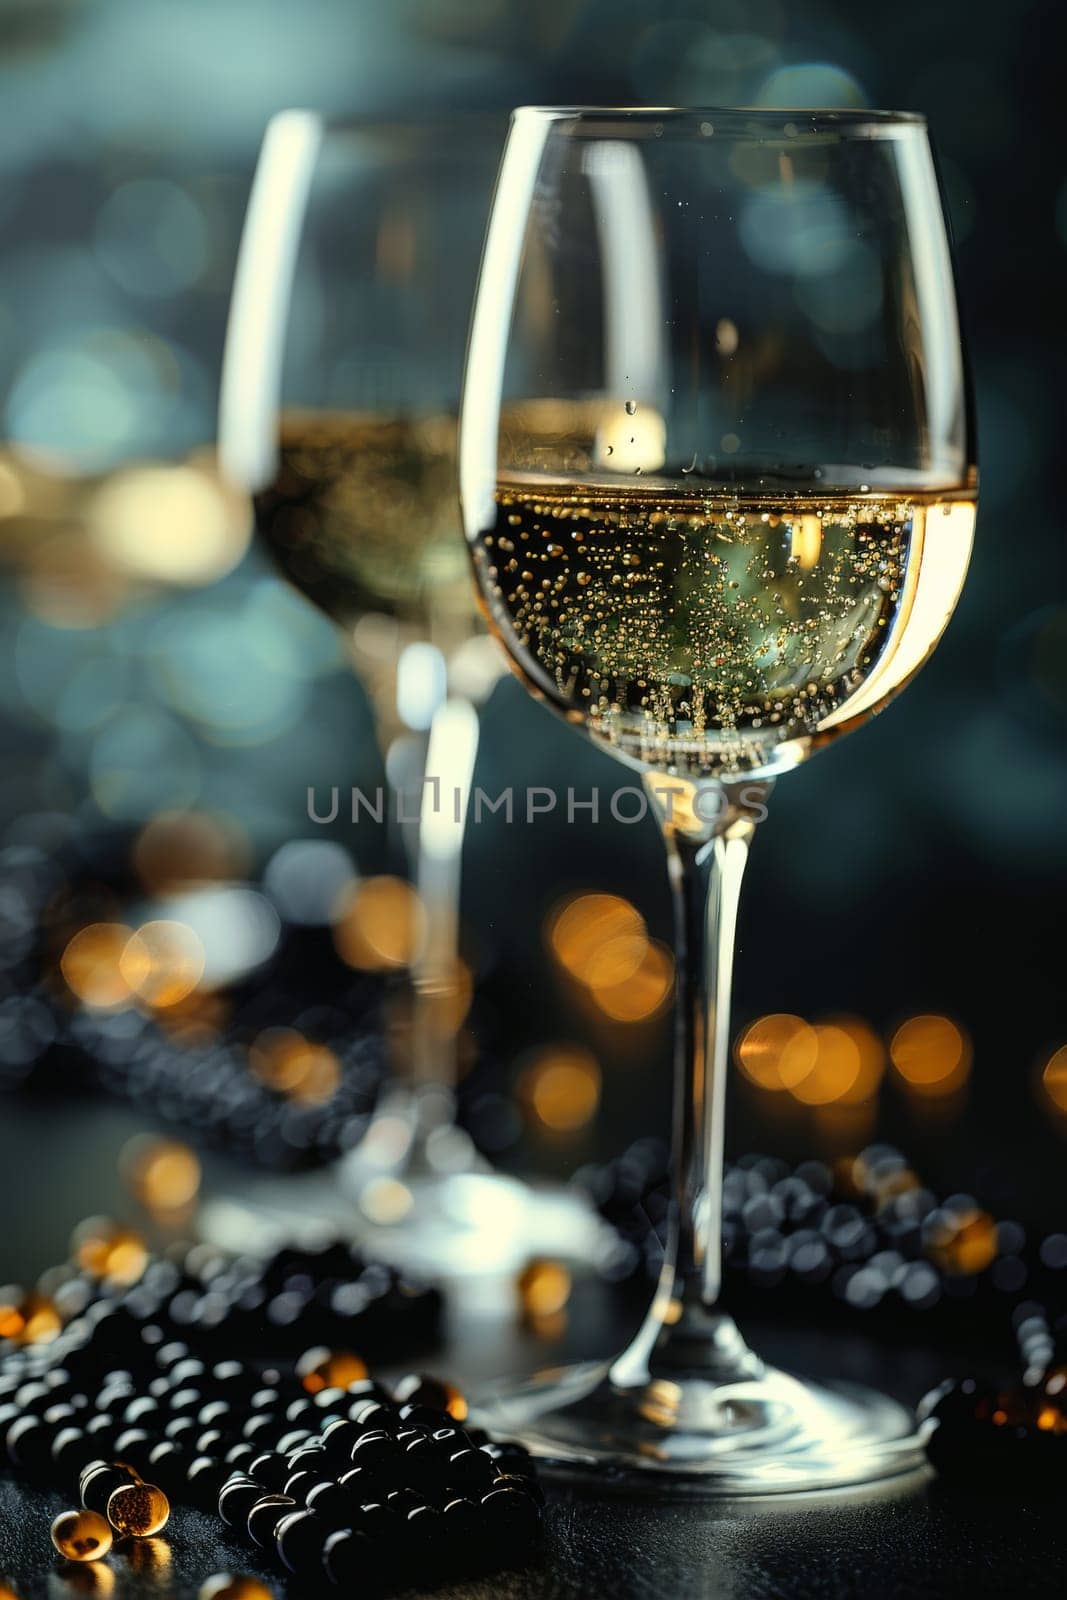 Two wine glasses filled with sparkling wine on a dark background. The wine glasses are placed close to each other, and the wine inside them is bubbly and effervescent